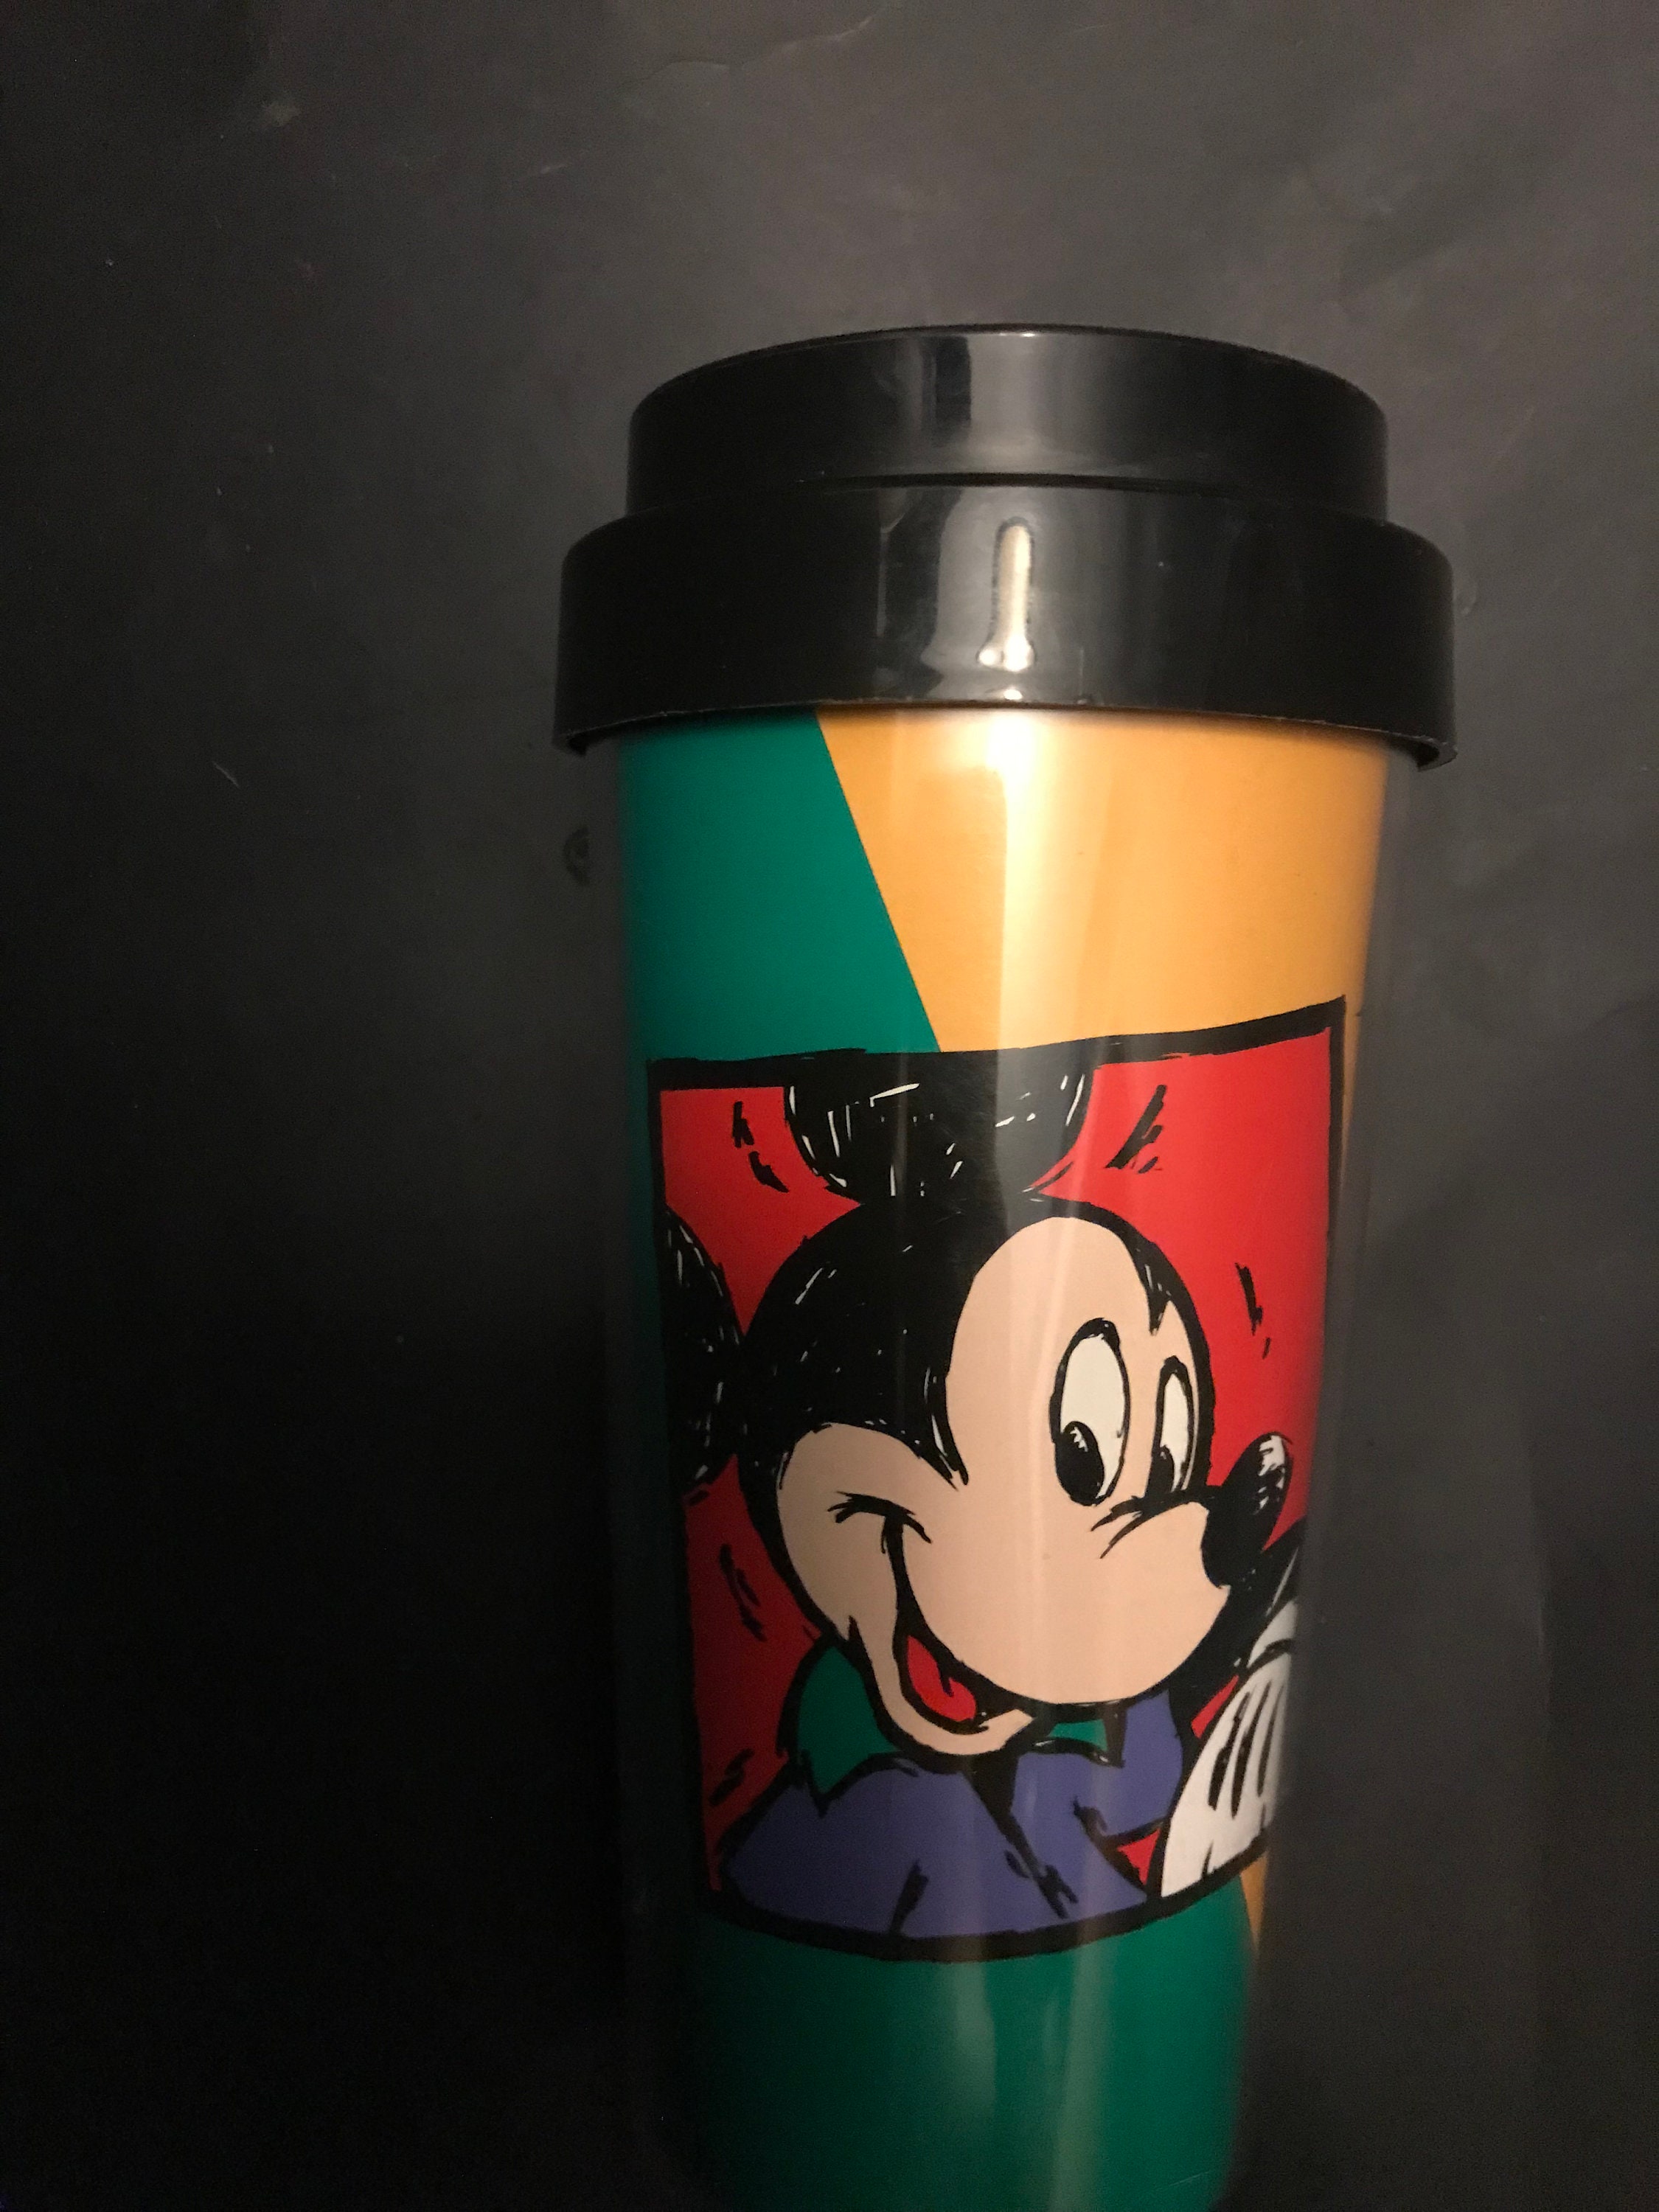 Disney Mickey Mouse Cartoon cups With straw kids snow White Captain America  Sport Bottles girls Princess Sophia Feeding cups - Price history & Review